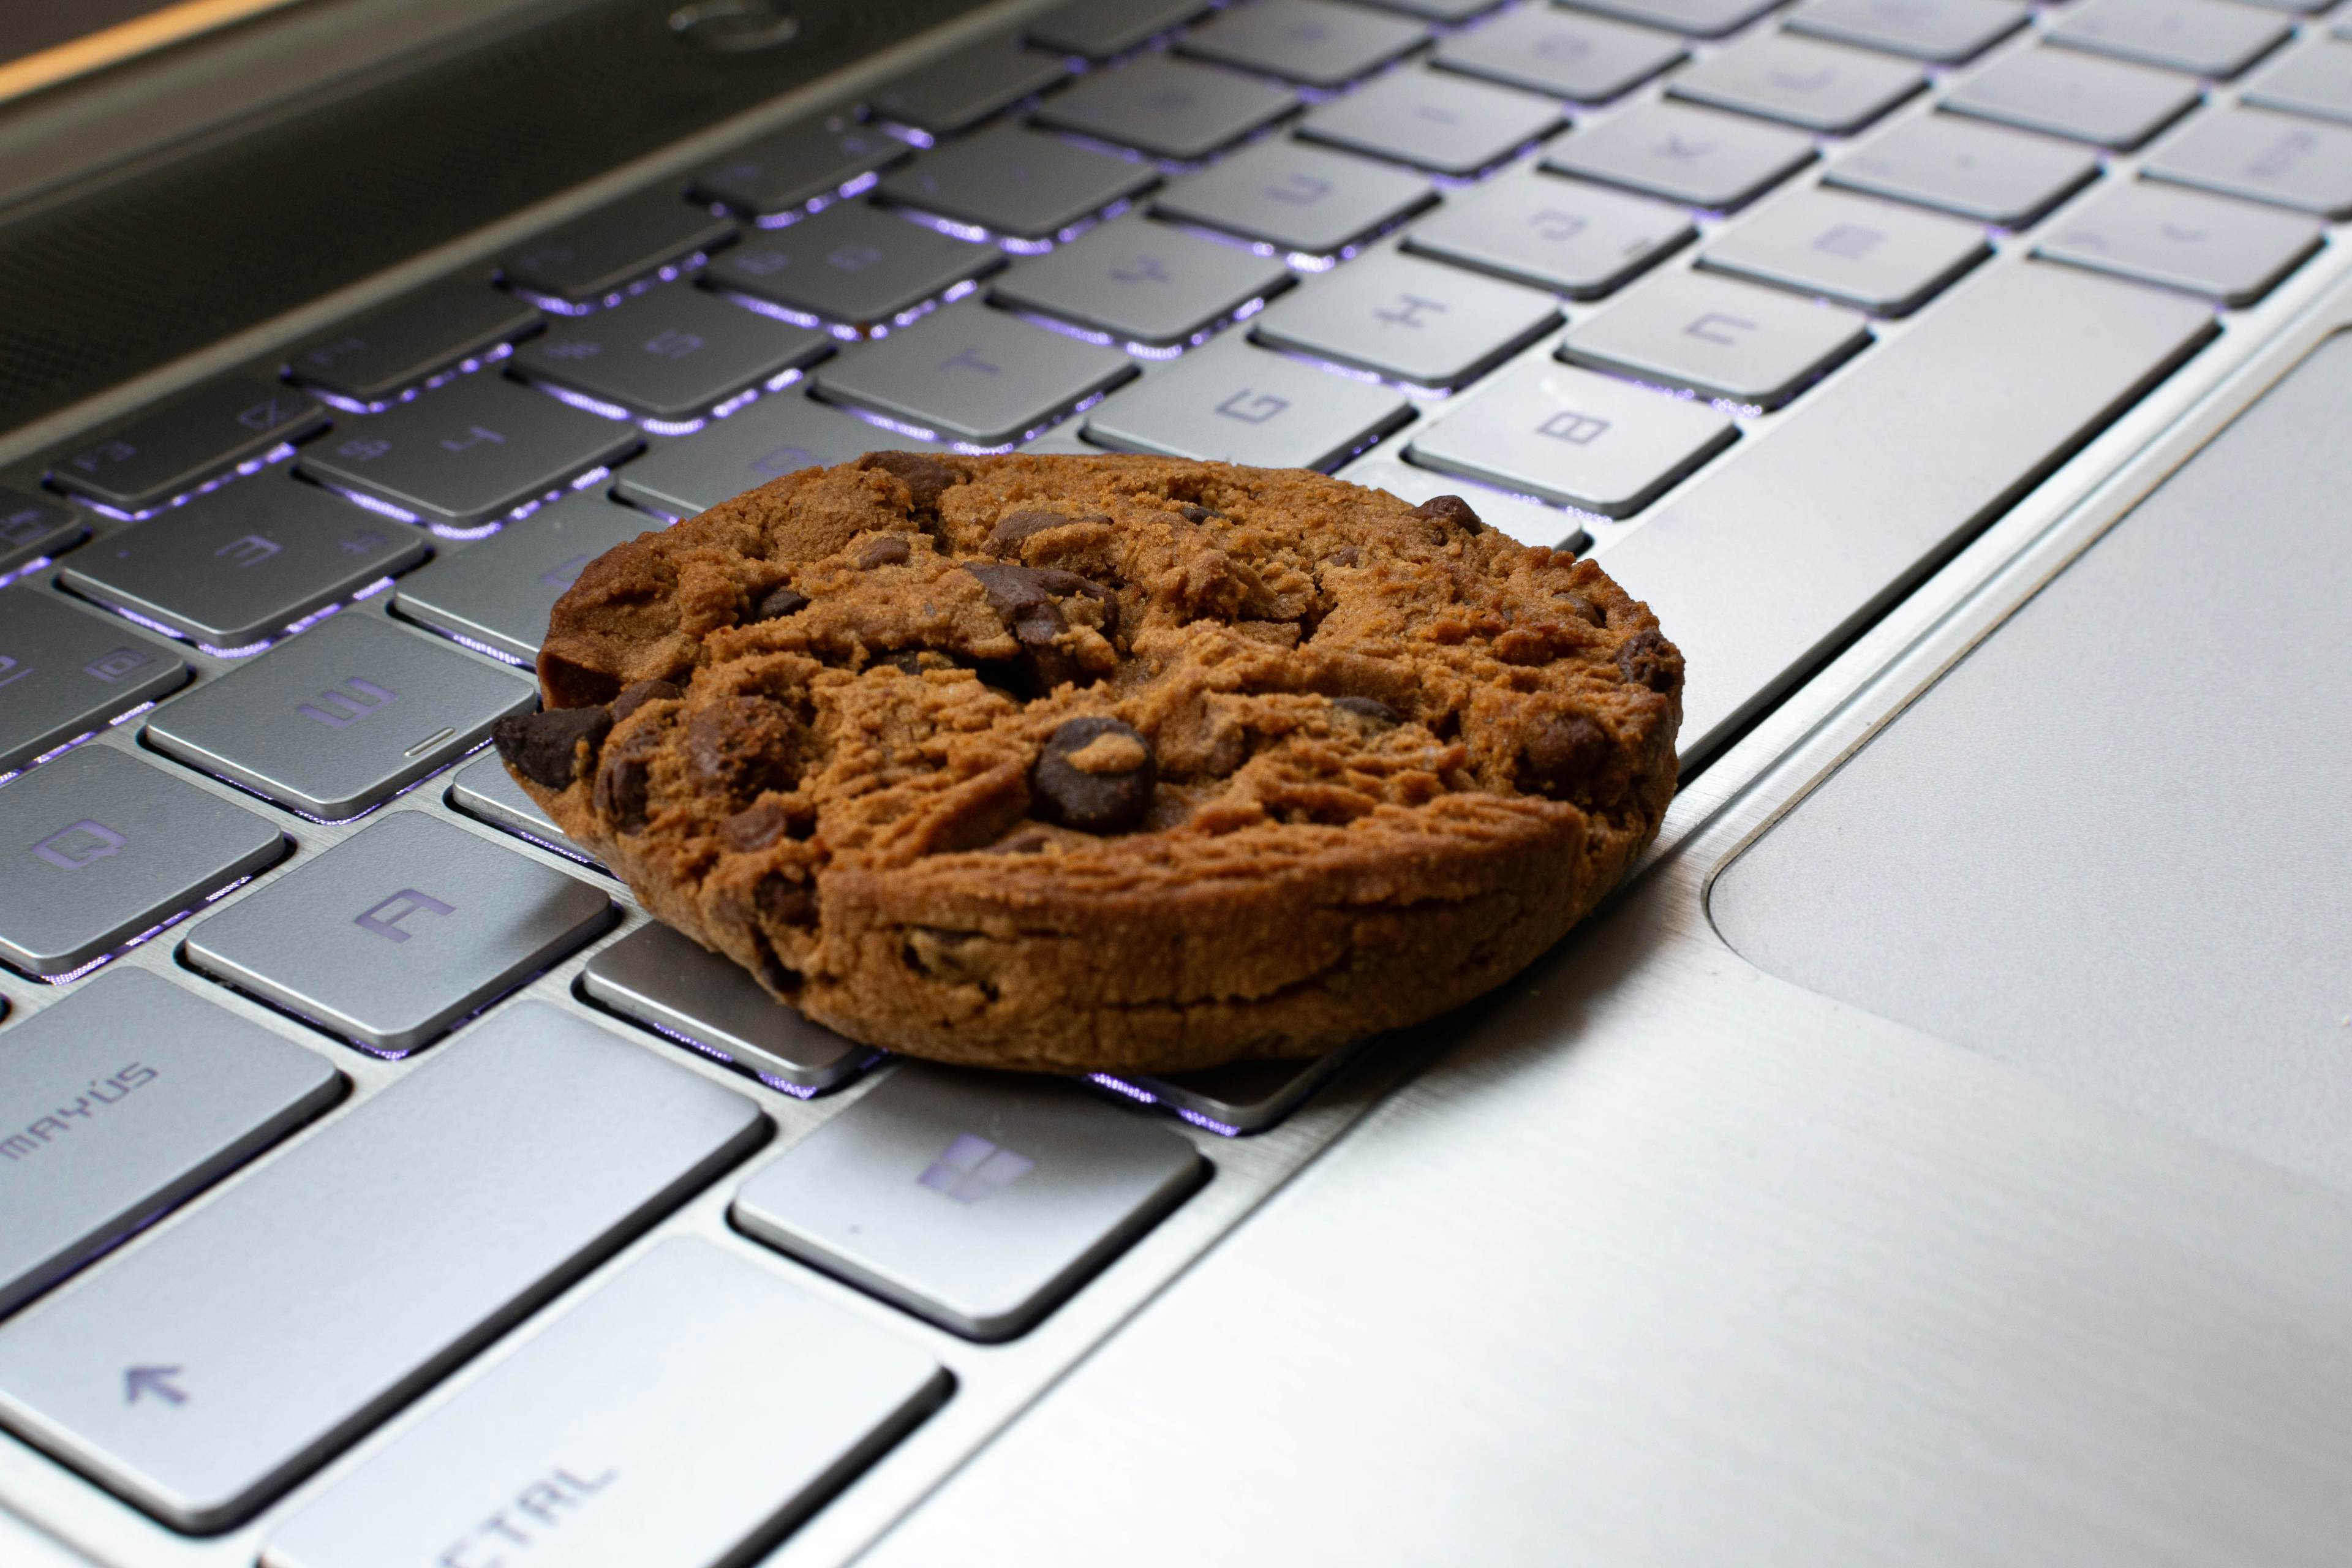 How to measure digital marketing without cookies?